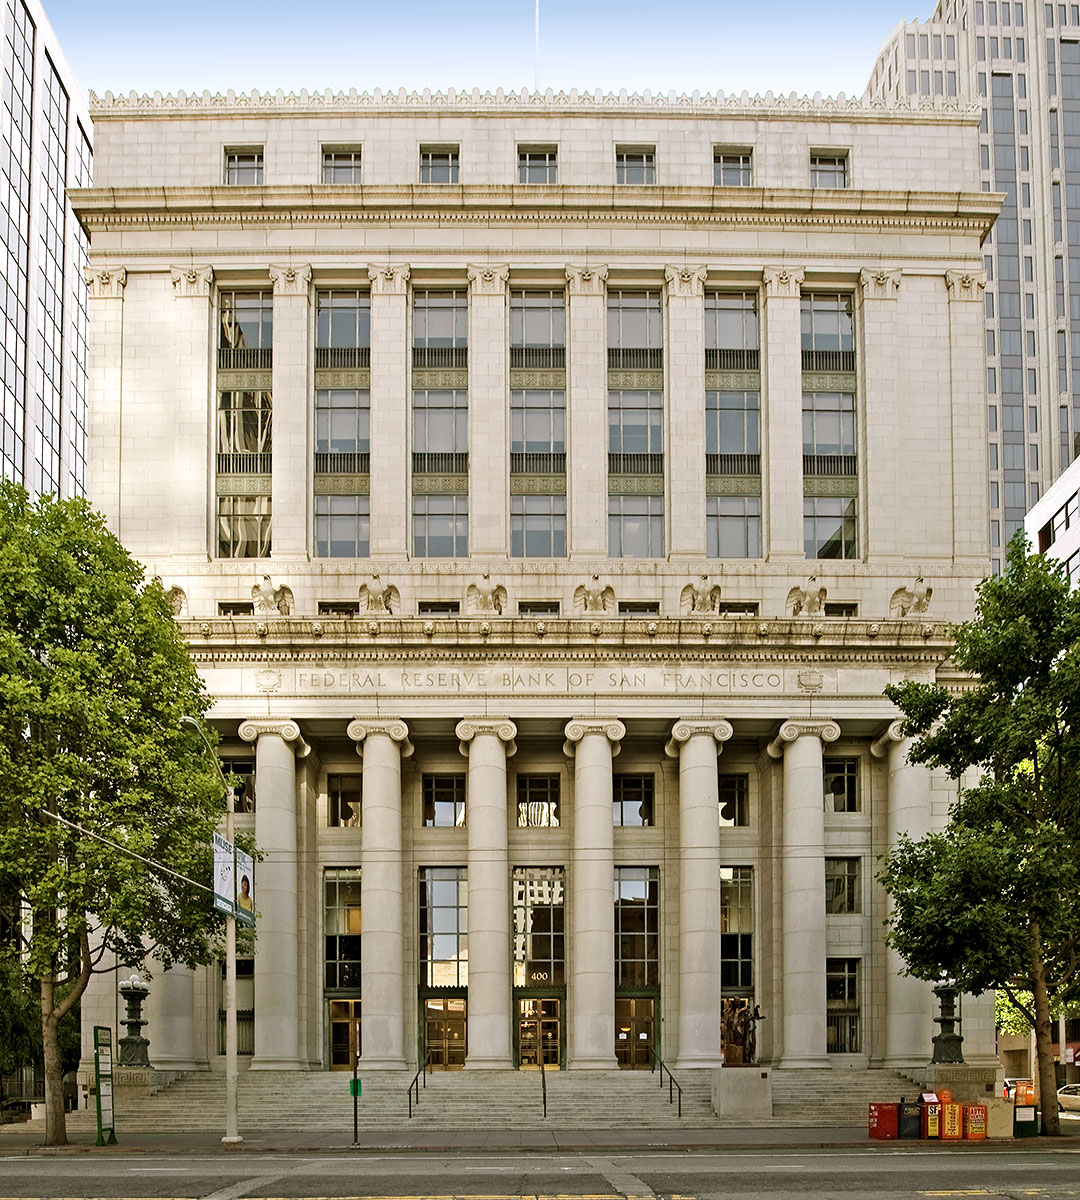 The Federal Reserve Bank Building was designed by George Kelham and built in 1924.